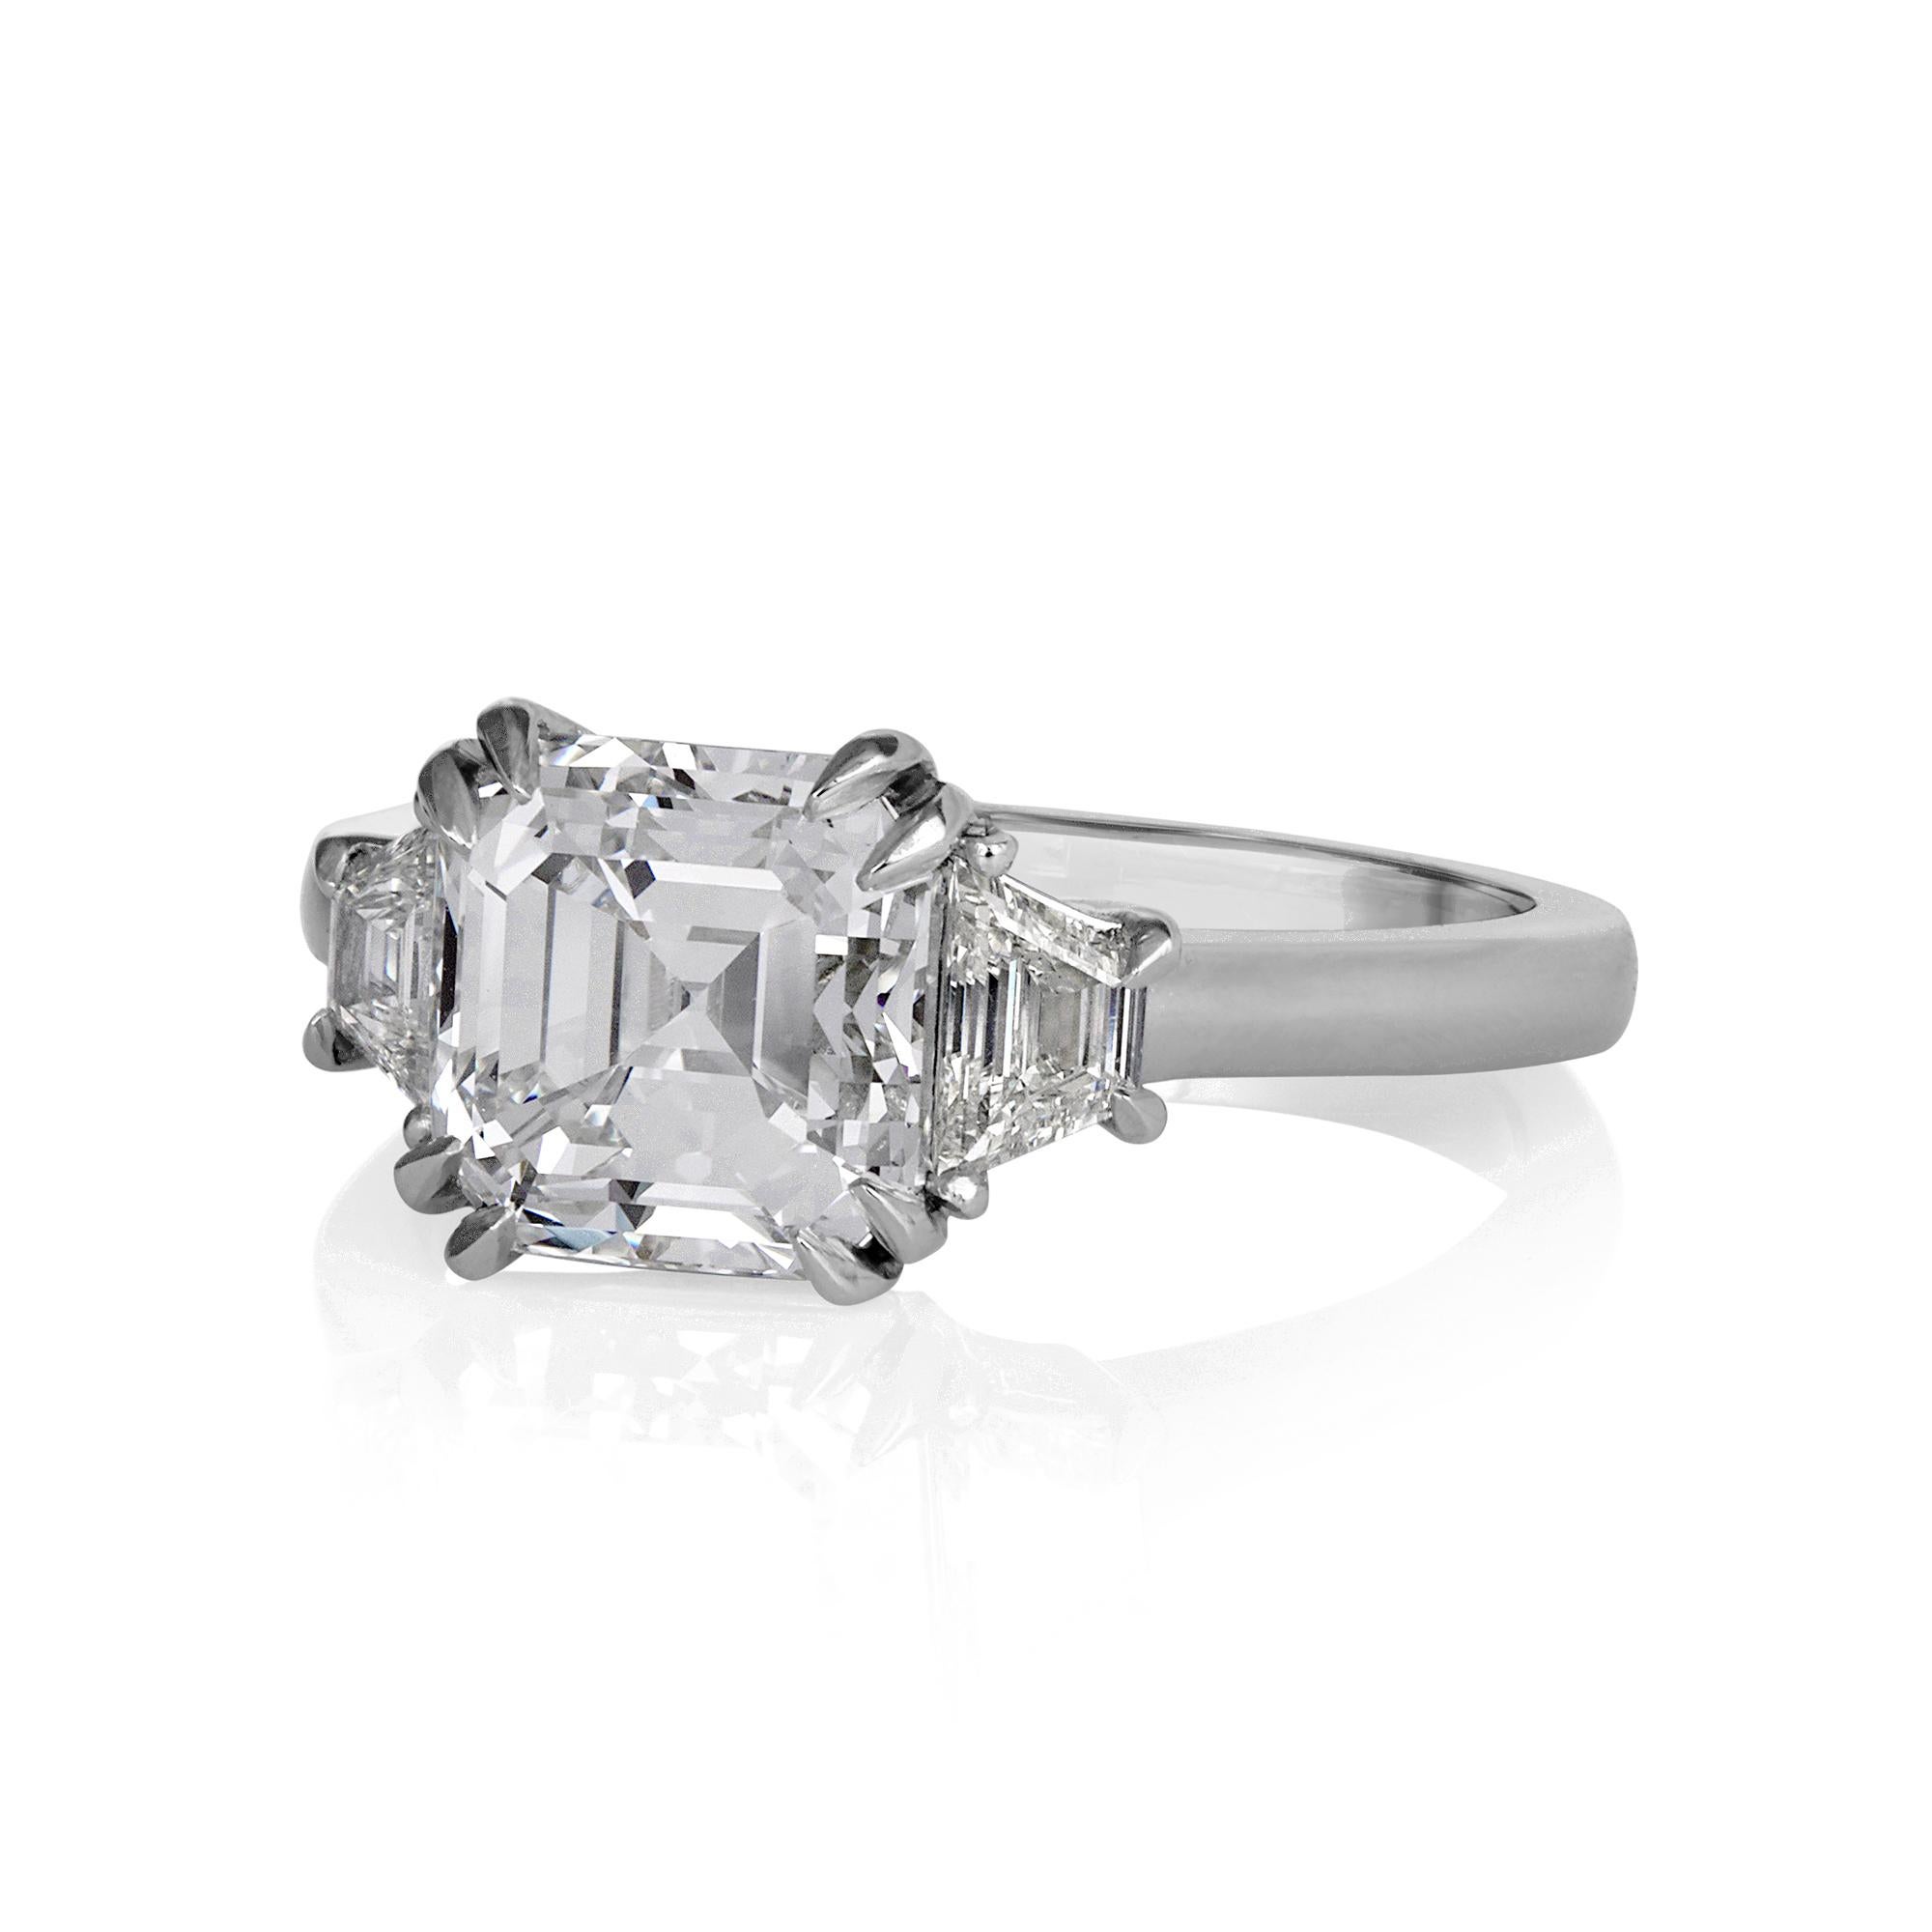 Timeless Estate GIA 3.09ct Asscher Cut Diamond Engagement Anniversary 3 Stone Platinum Ring.

This Impressive ring will take your breath away! Once in a lifetime opportunity to own a HUGE 100% NATURAL NONE-treated diamond for a fraction of the